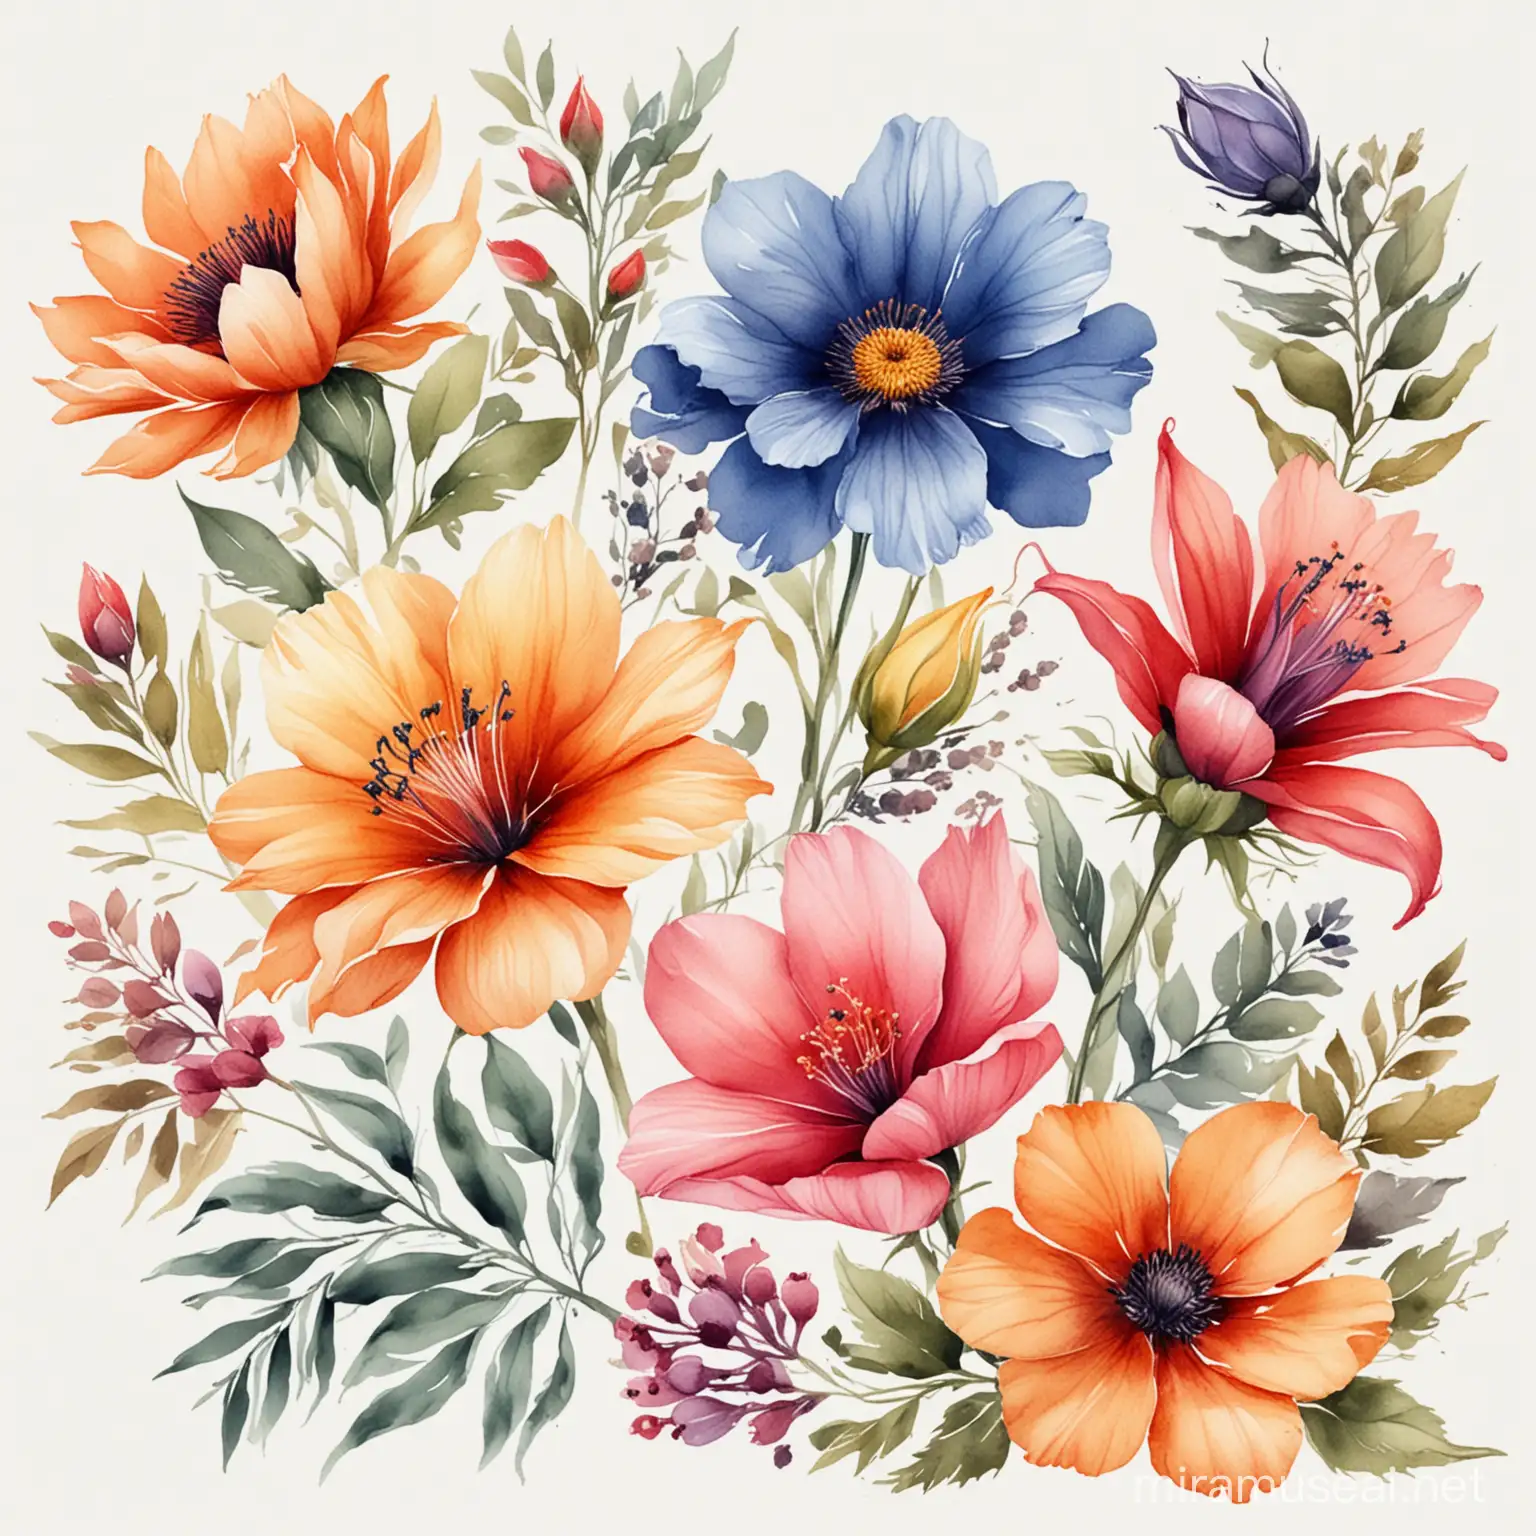 watercolor style flowers realistic sharp on a white backround